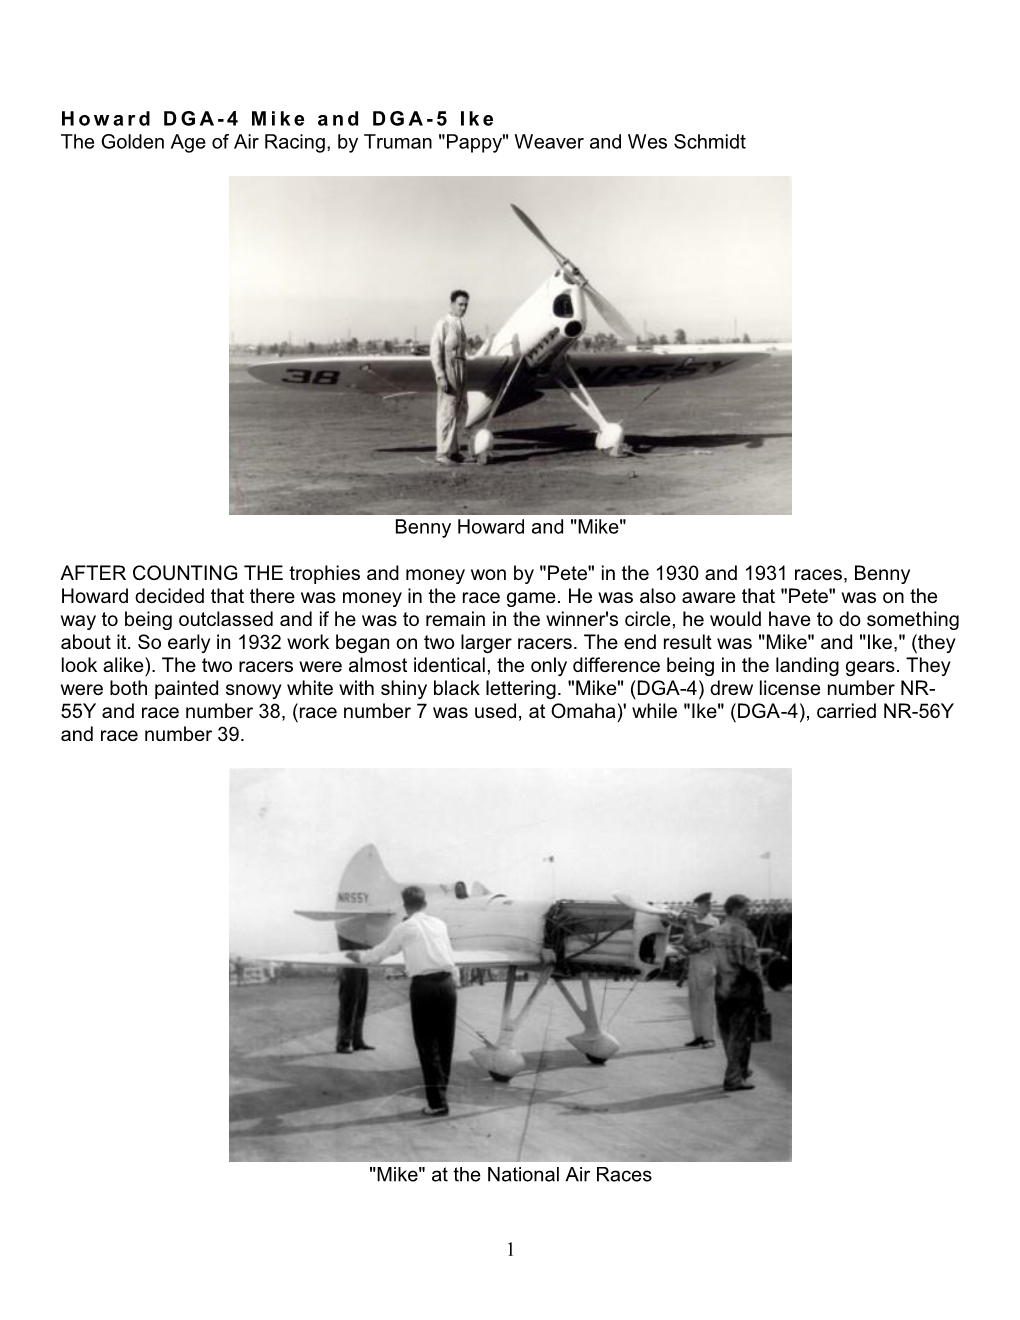 Mike and DGA - 5 I K E the Golden Age of Air Racing, by Truman "Pappy" Weaver and Wes Schmidt